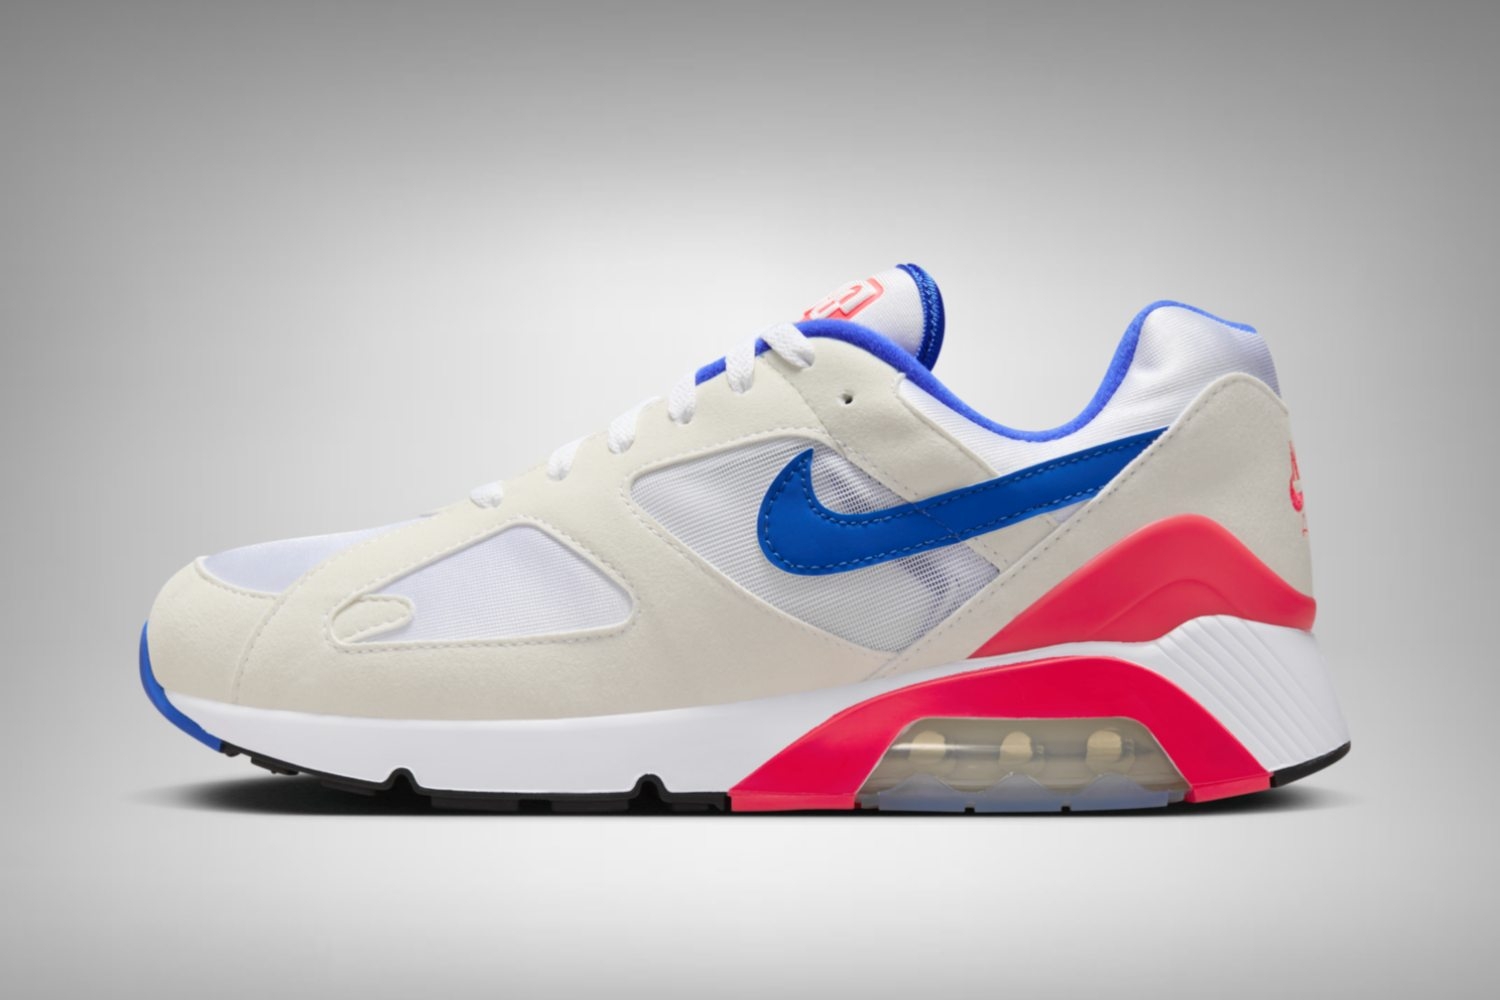 Official images of the Nike Air 180 'Ultramarine'